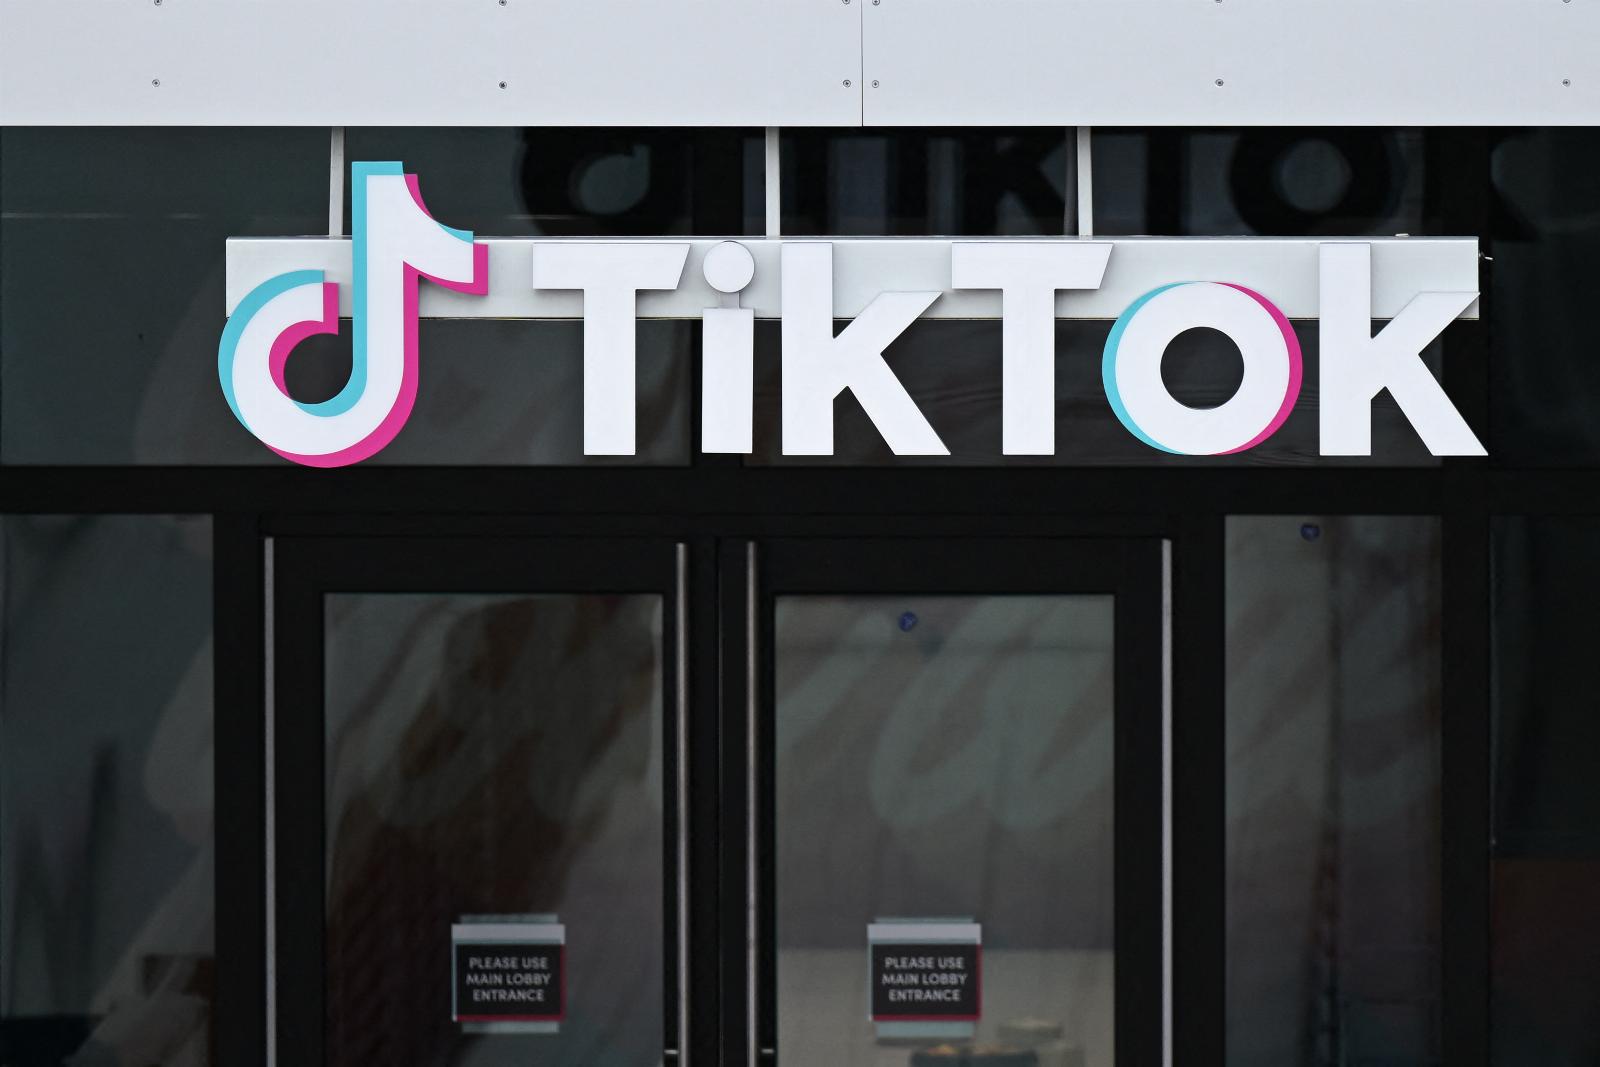 TikTok CEO takes to the app to announce company’s more than 150M active users in the US